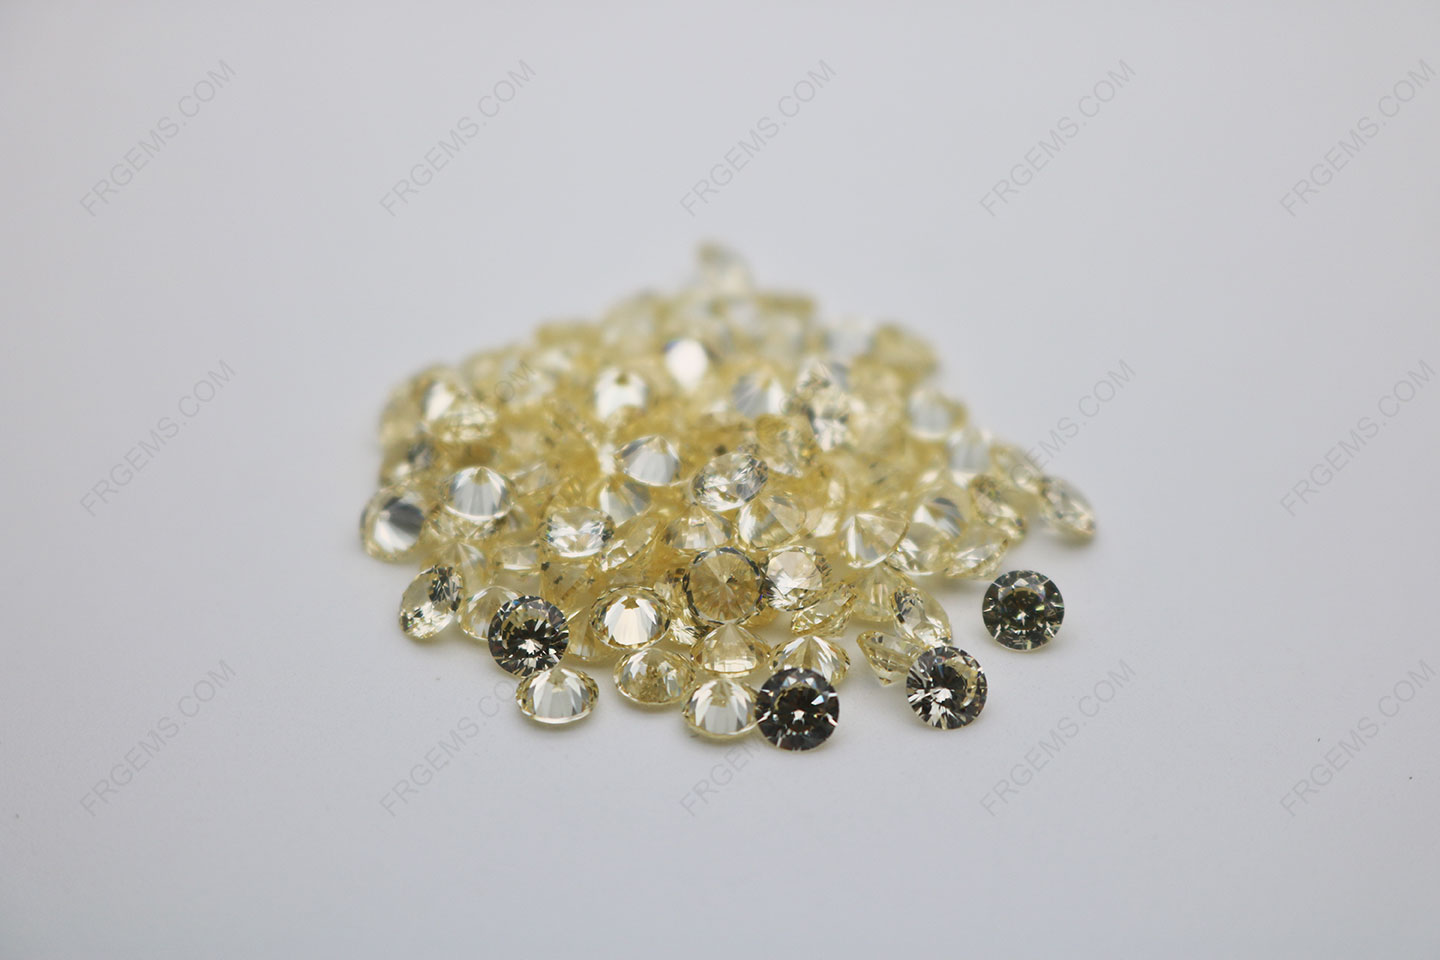 Cubic Zirconia Canary Yellow Round Shape Faceted Cut 4mm stones CZ06 IMG_0646